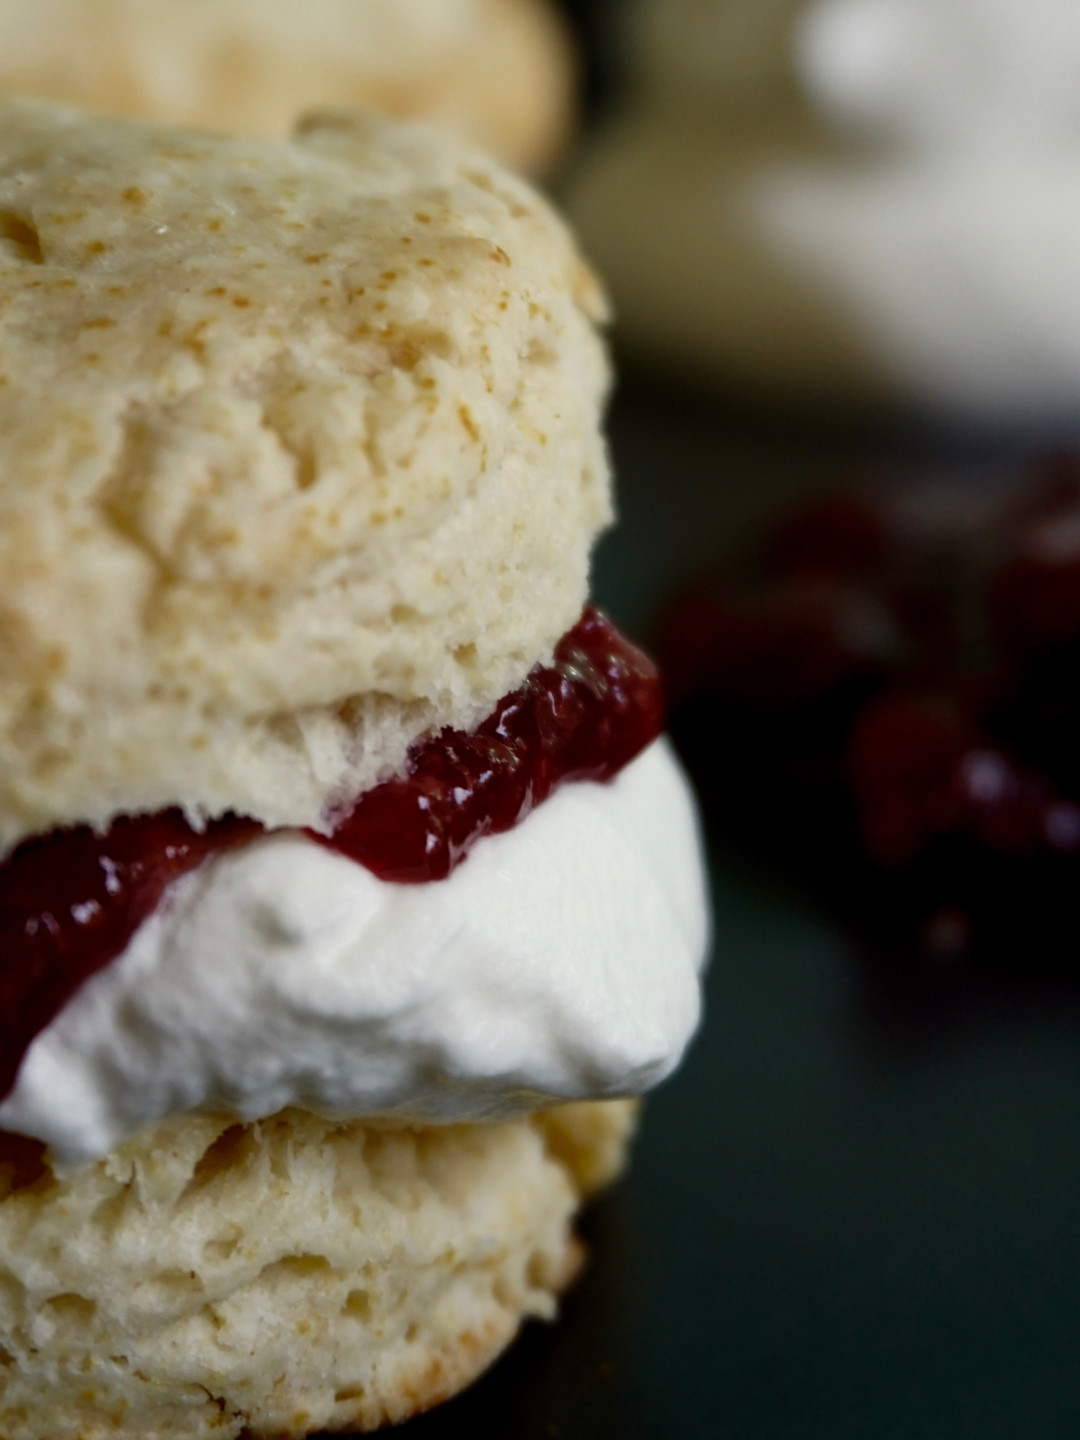 An Irish scone filled with whipped cream and jam